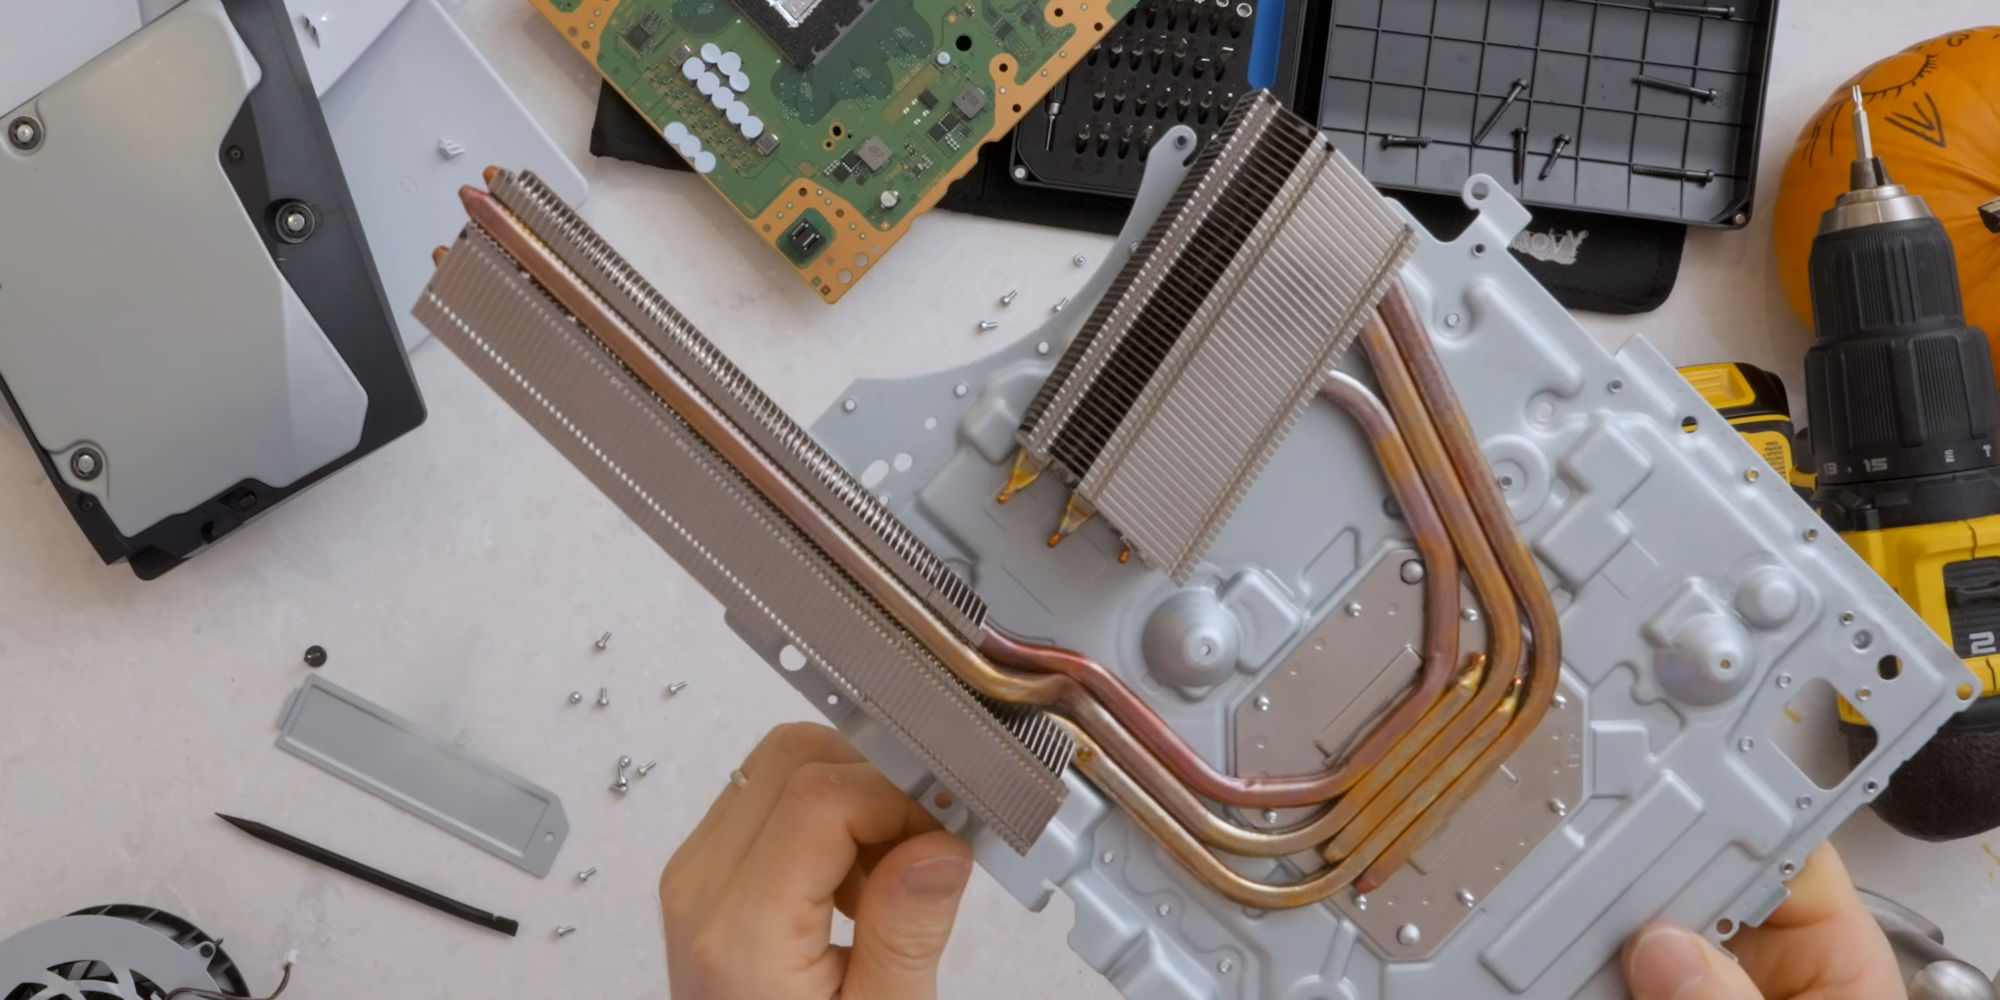 PS5 Slim Teardown Videos Reveal a New Console That's Not That